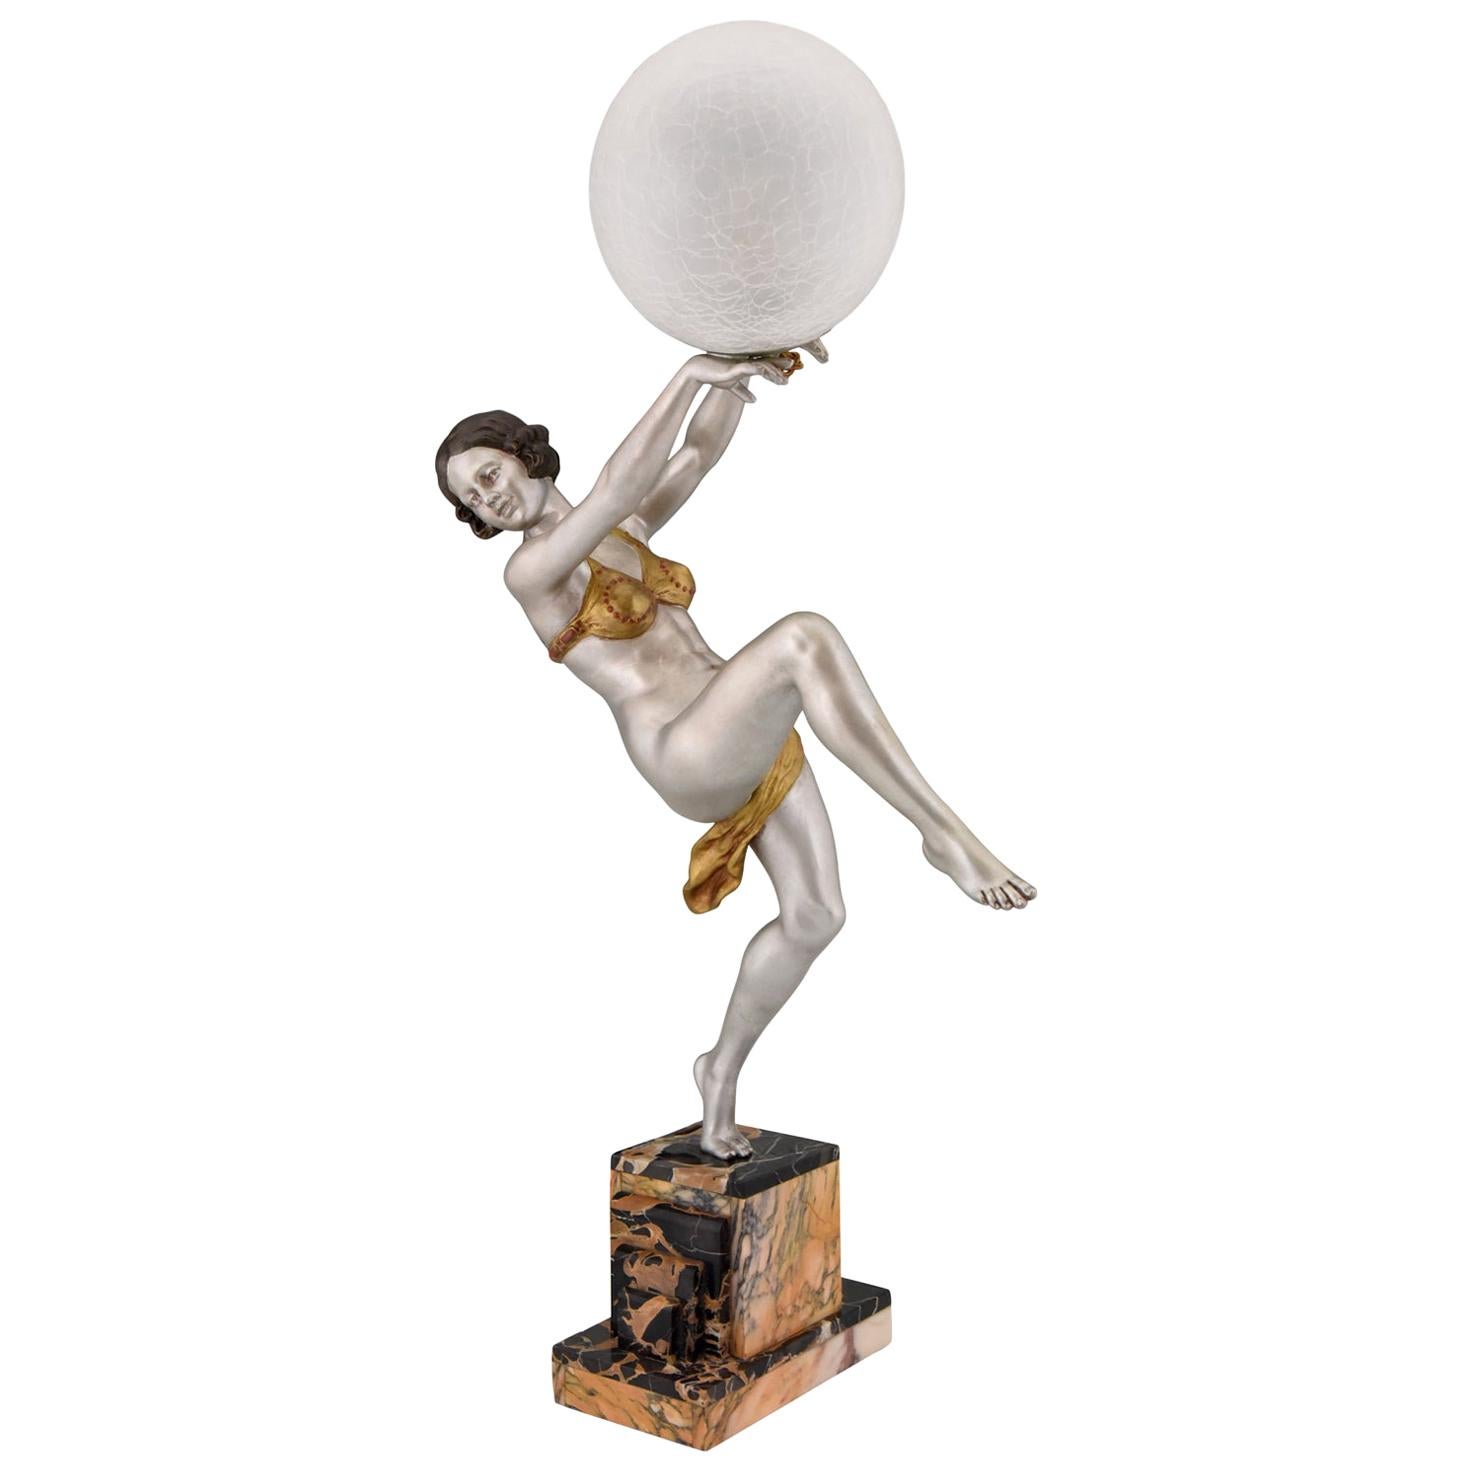 Art Deco Lamp Dancing Nude Lady Holding a Glass Ball Emile Carlier, France, 1930